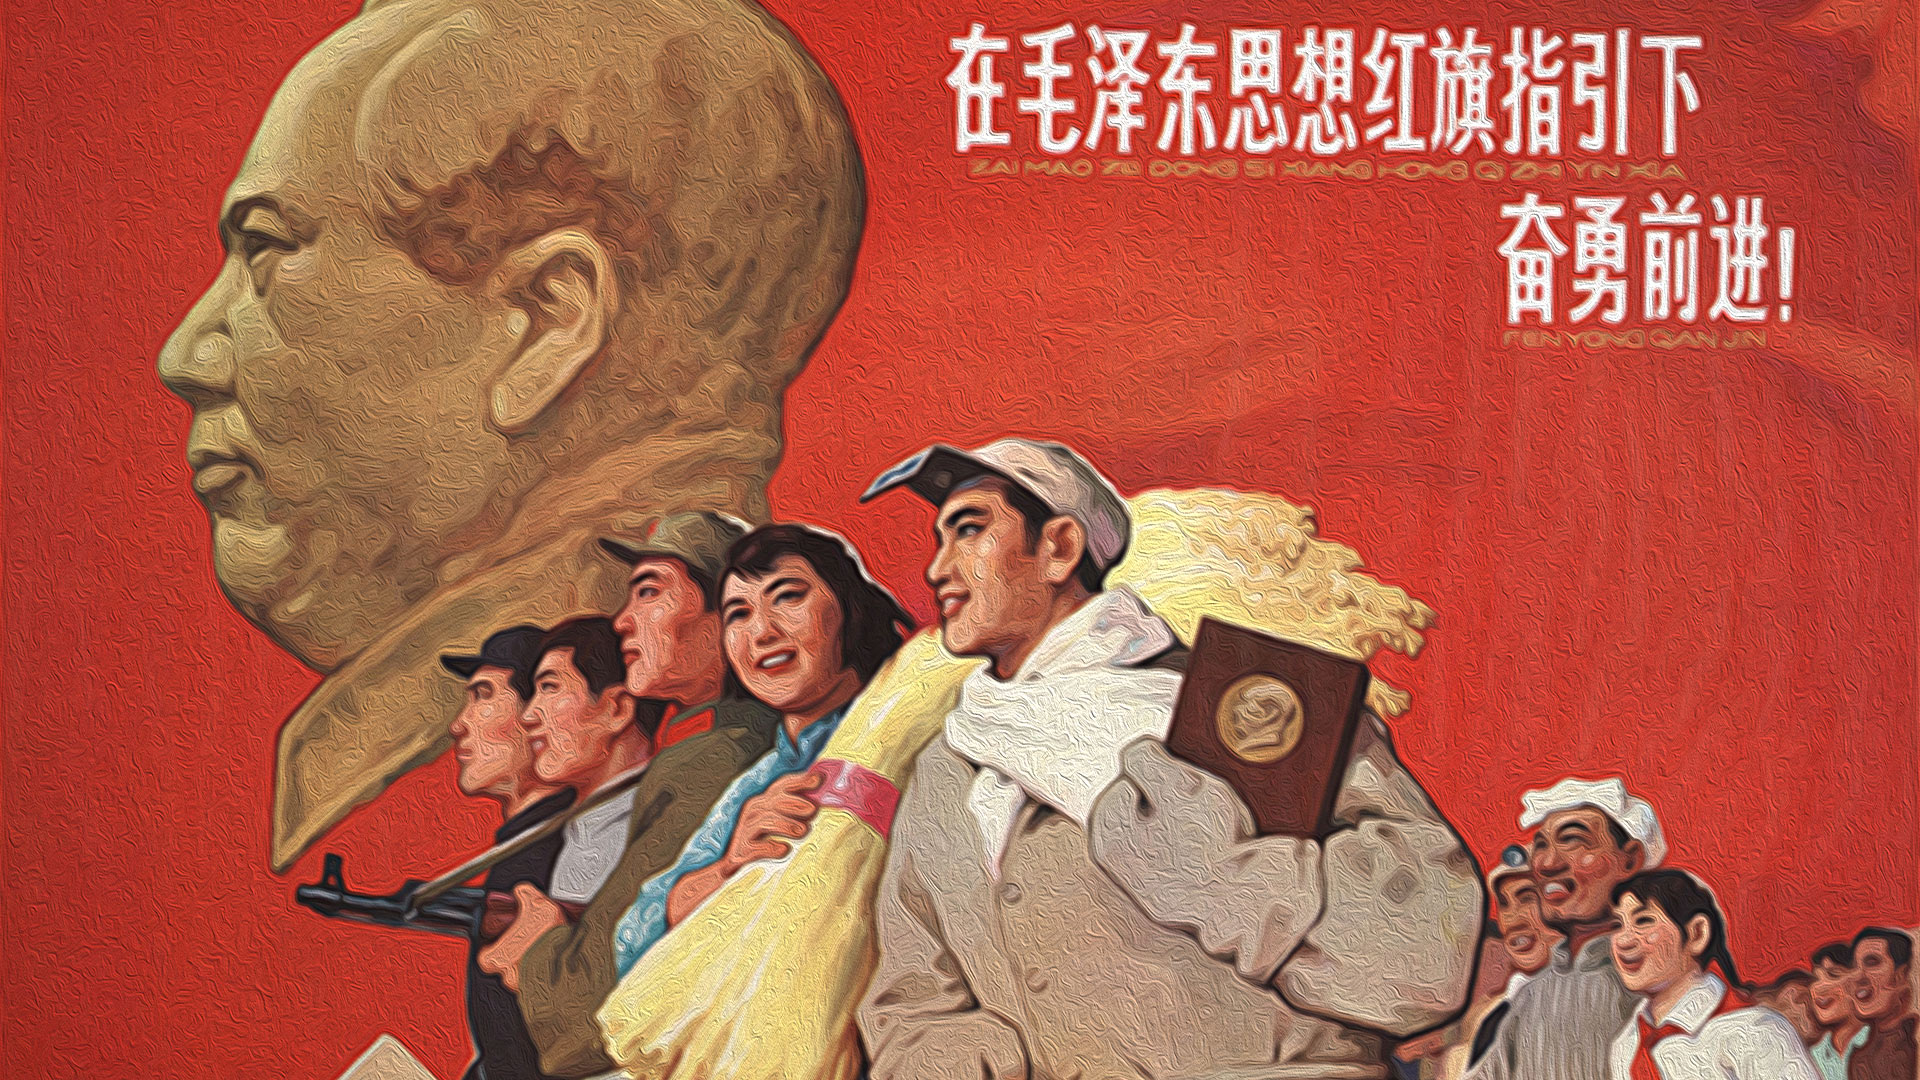 October 01, 1949: The Chinese revolution : Peoples Dispatch